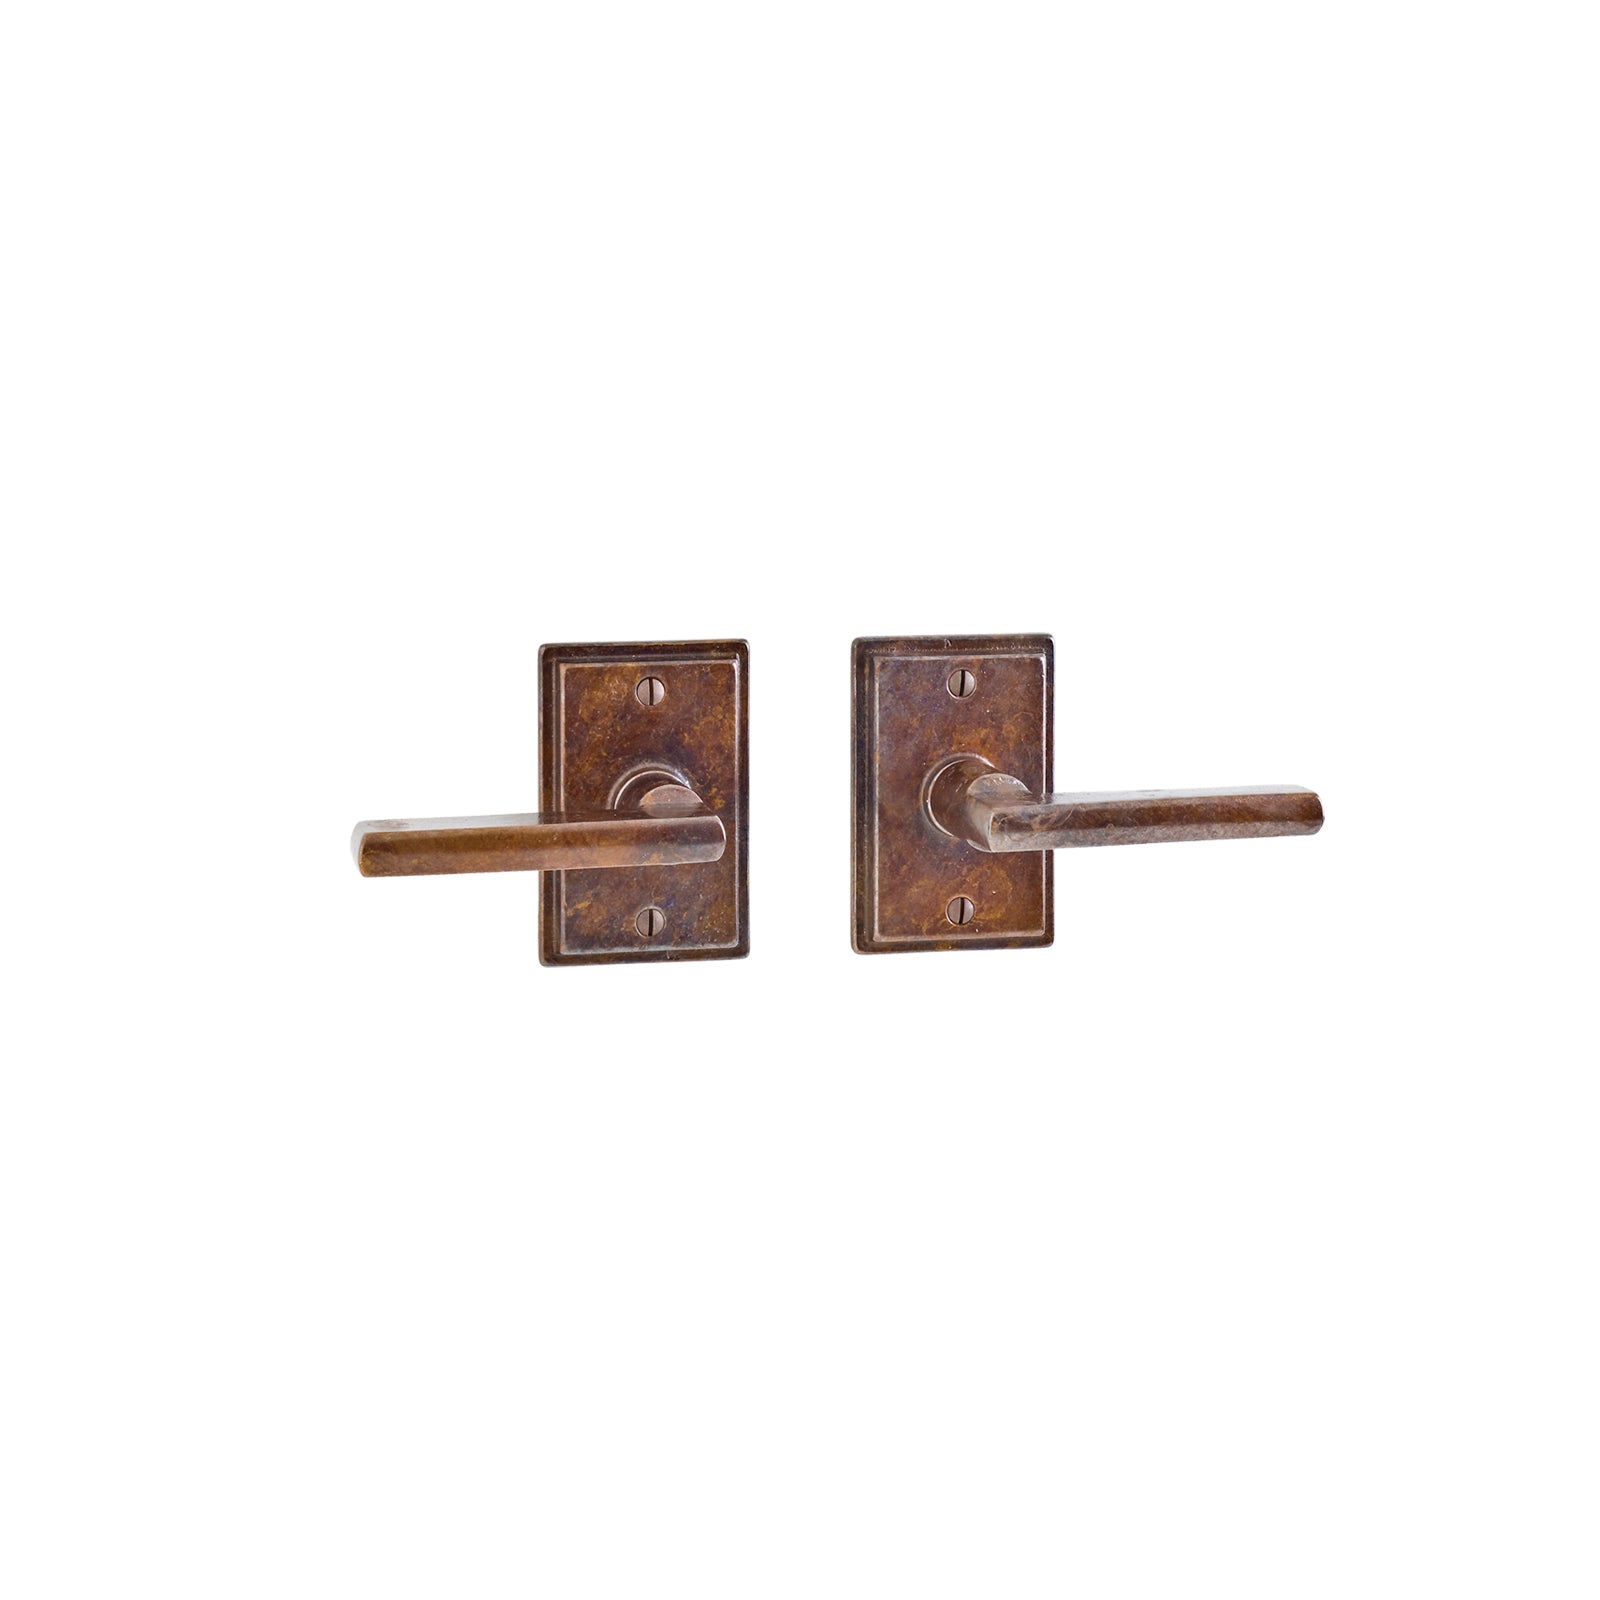 Stepped Builder Series 2 1/2" x 3 3/4" EB40 Passage Spring Latch